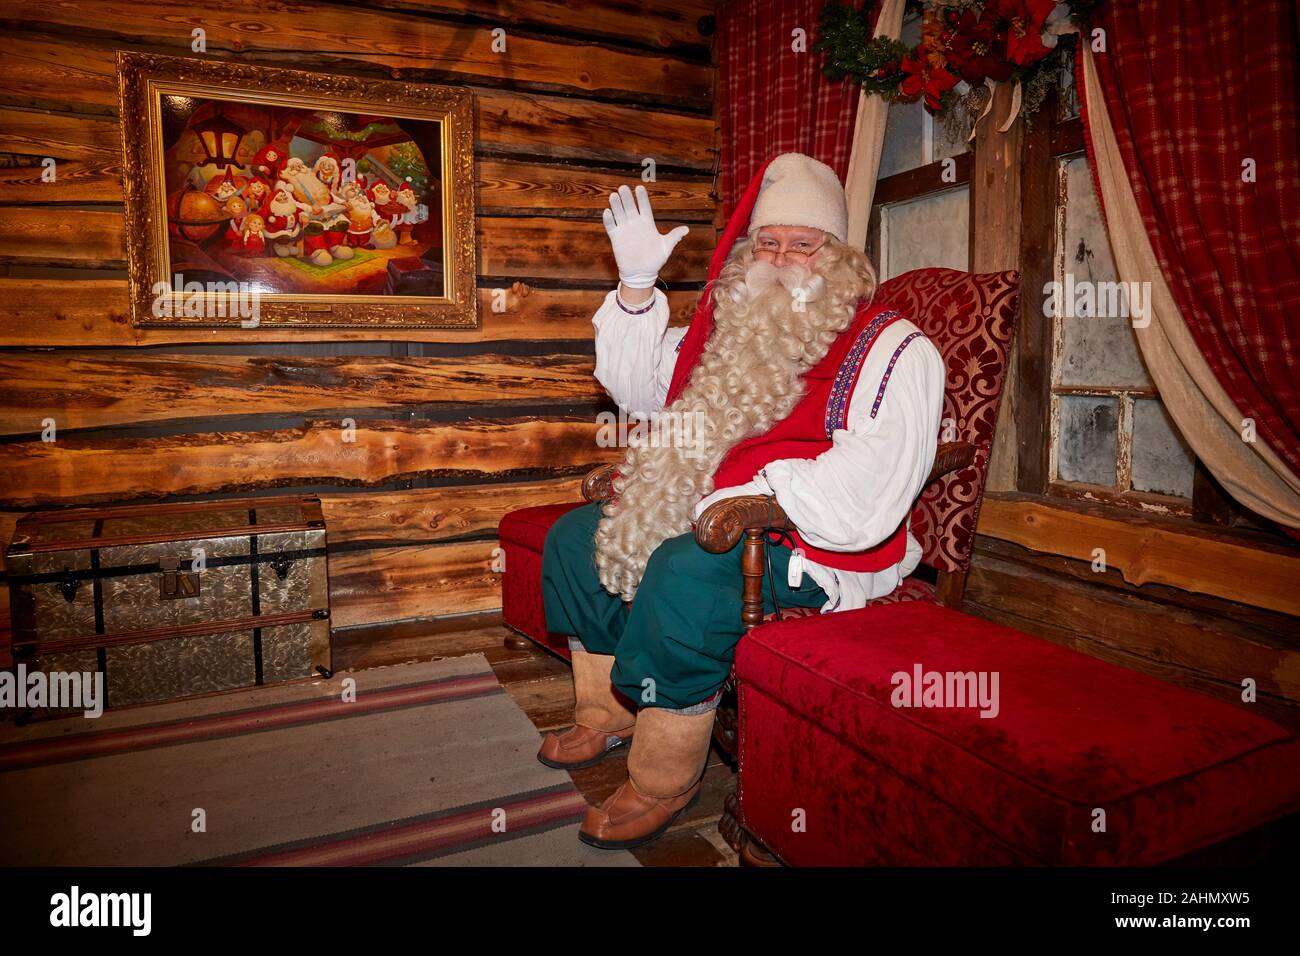 Finnish Rovaniemi a city in Finland and the region of Lapland Father Christmas at Santa Park Stock Photo